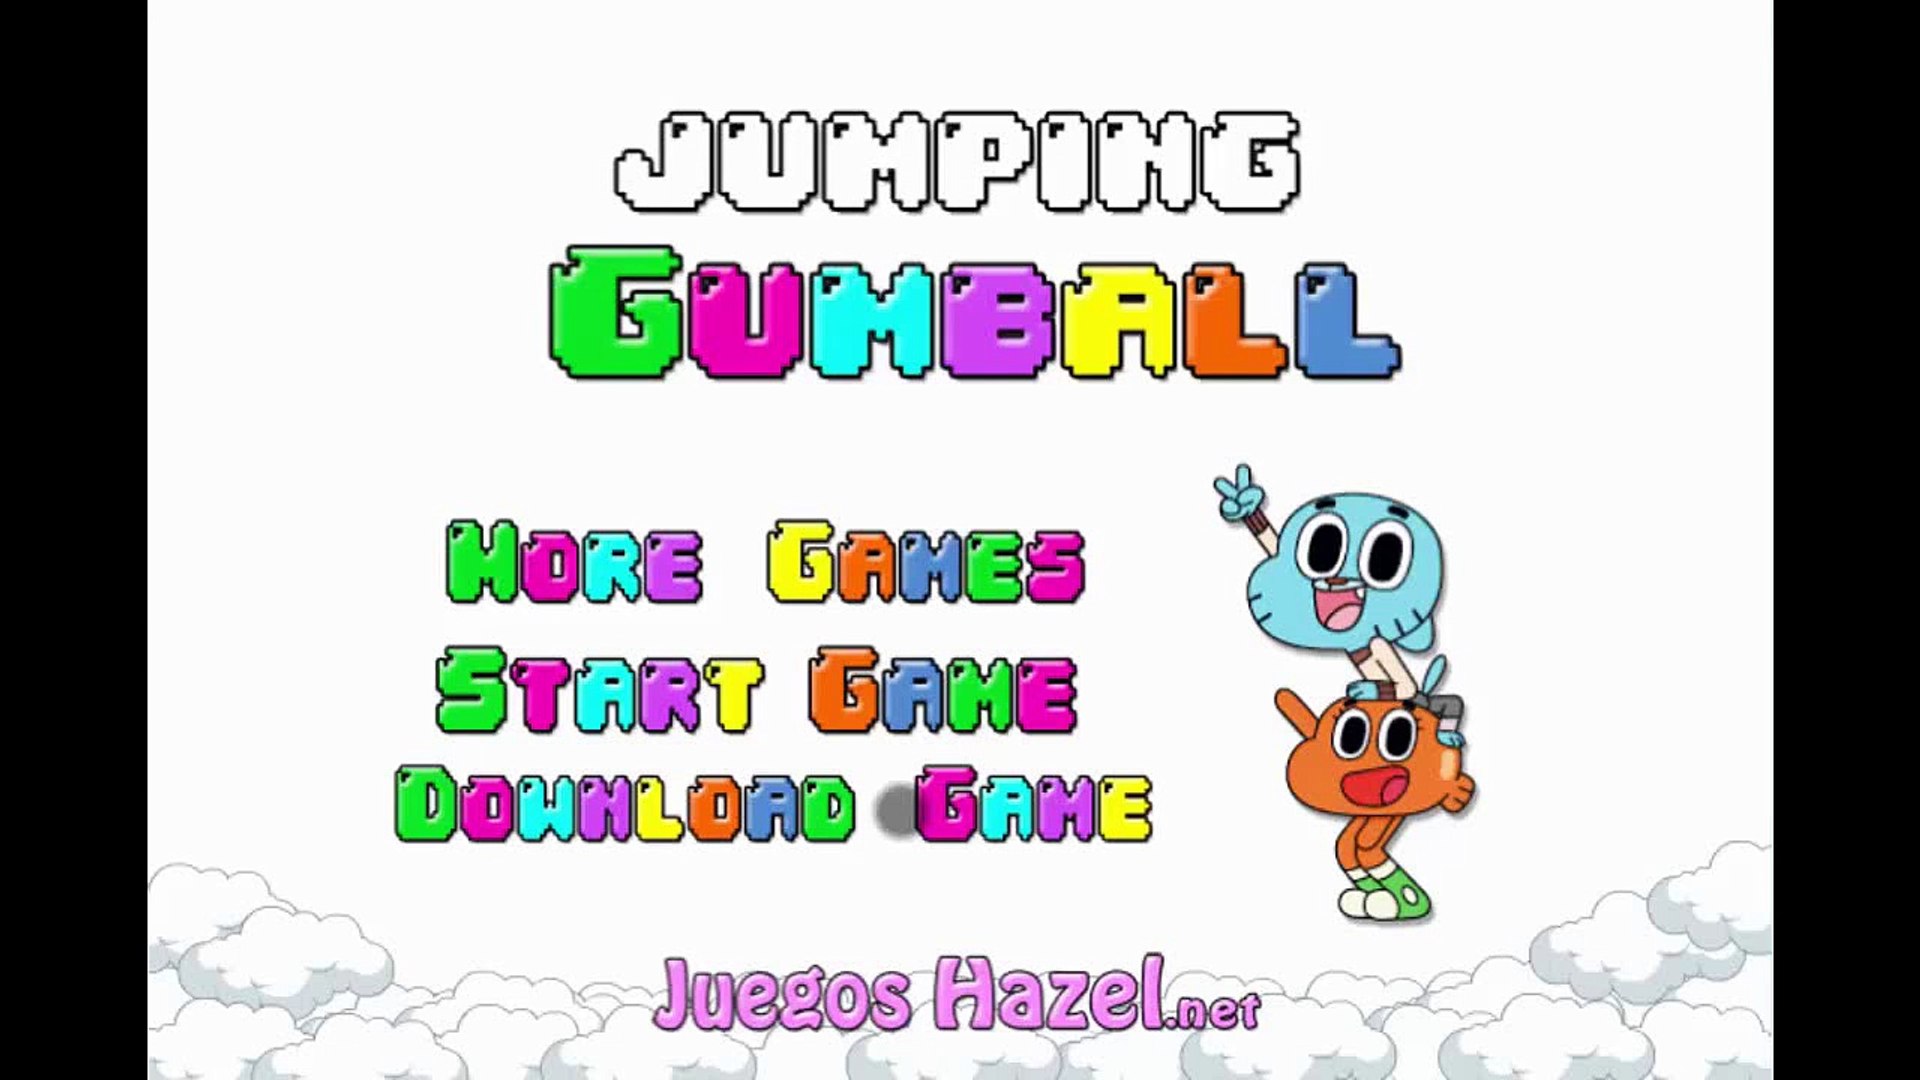 RAD Character (Cartoon Network Games) - The Amazing World of Gumball: Super  Disc Duel II﻿ - video Dailymotion